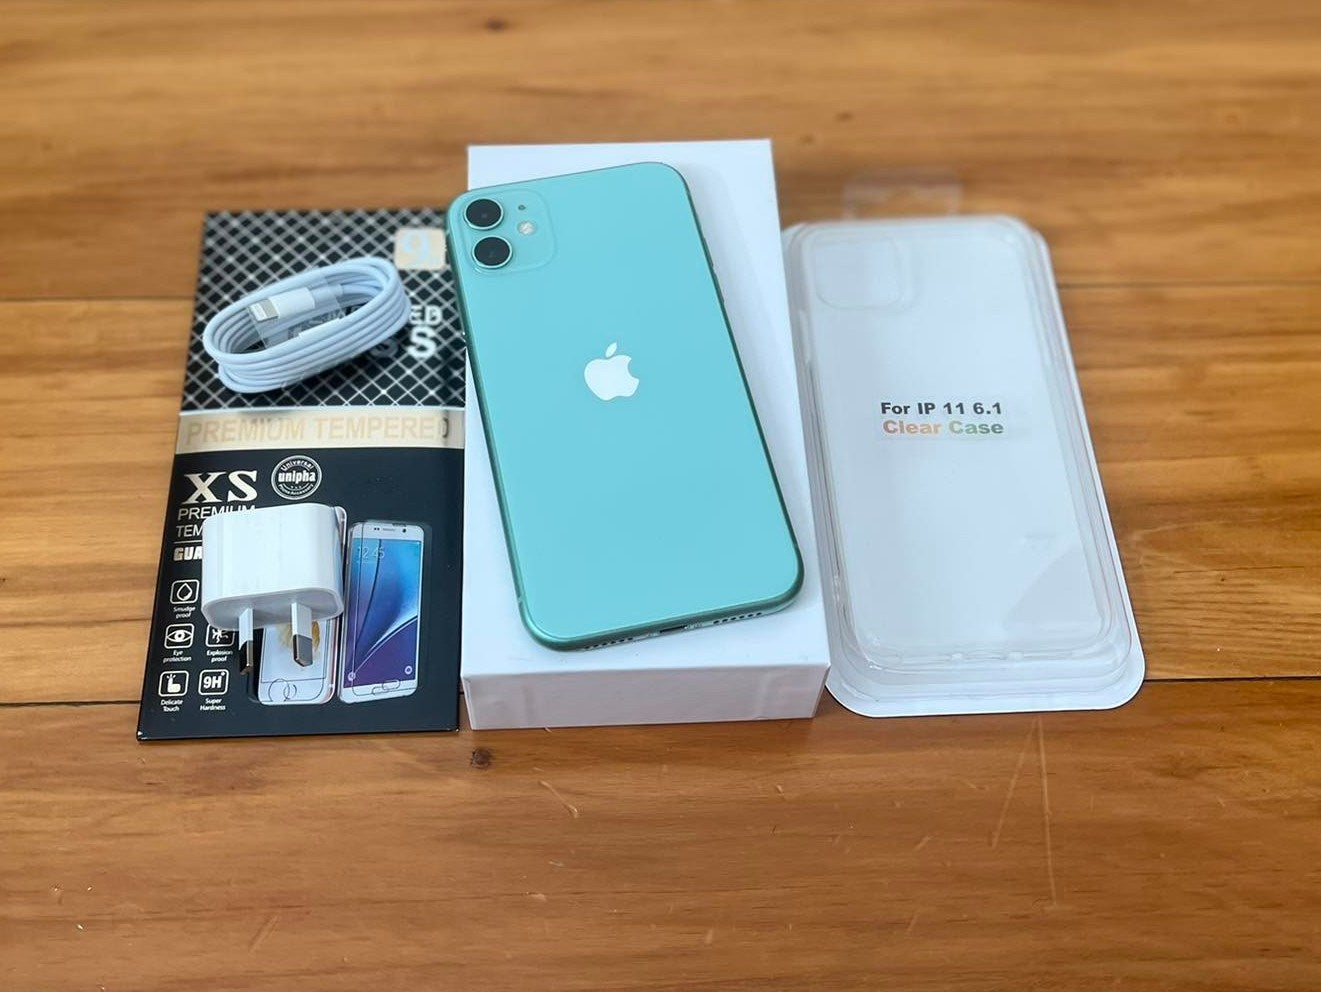 Apple iPhone 11 128GB Green New Battery, Case, Glass Screen Protector & Shipping (As New)